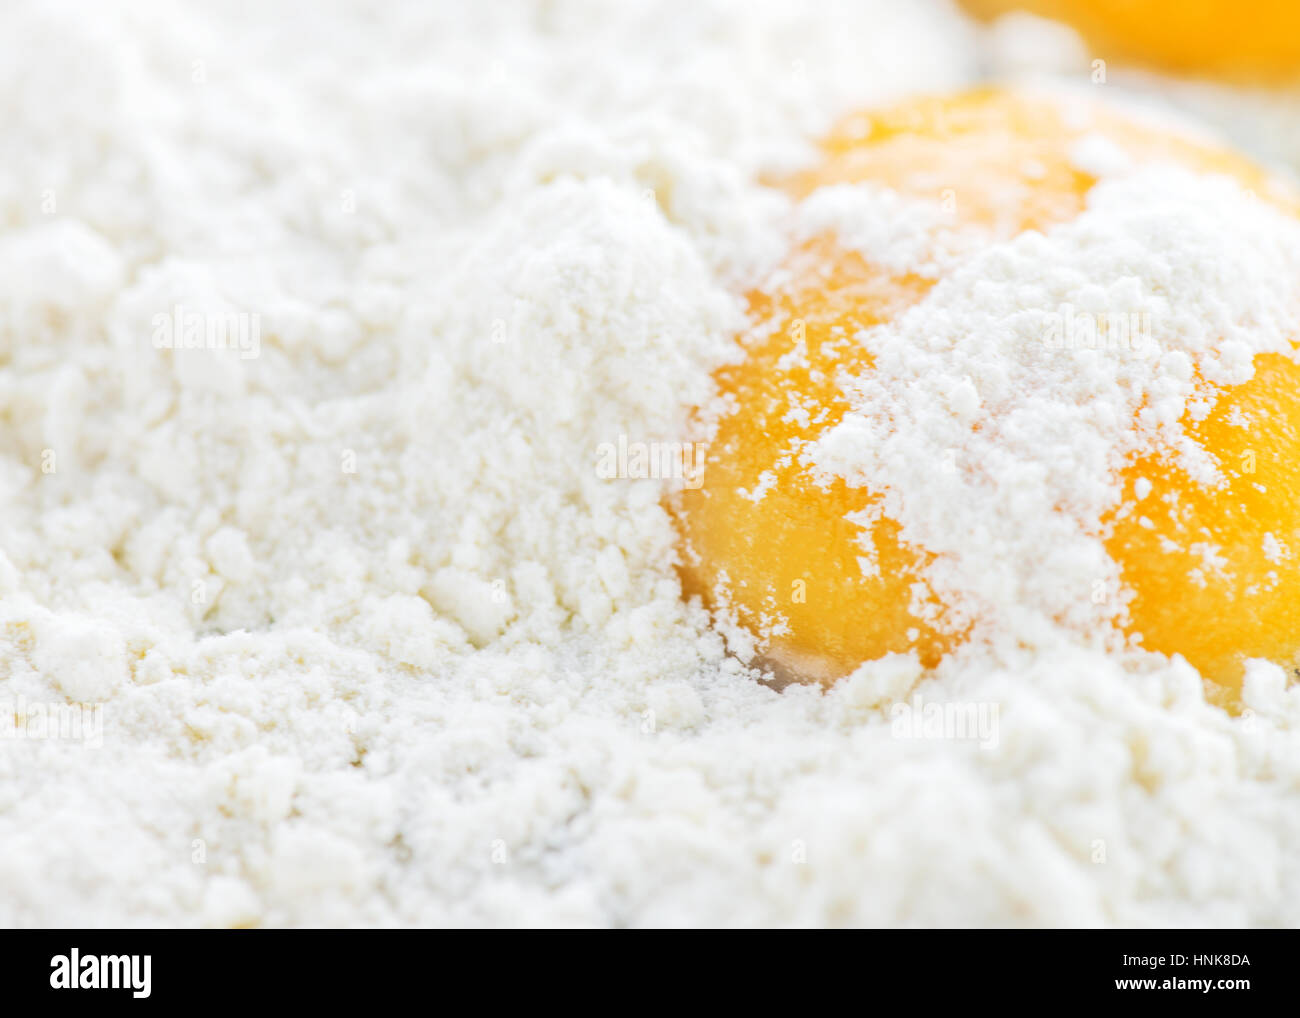 close up of egg yolk, white background made from flour to ad copy space for menu, notices or index. Stock Photo